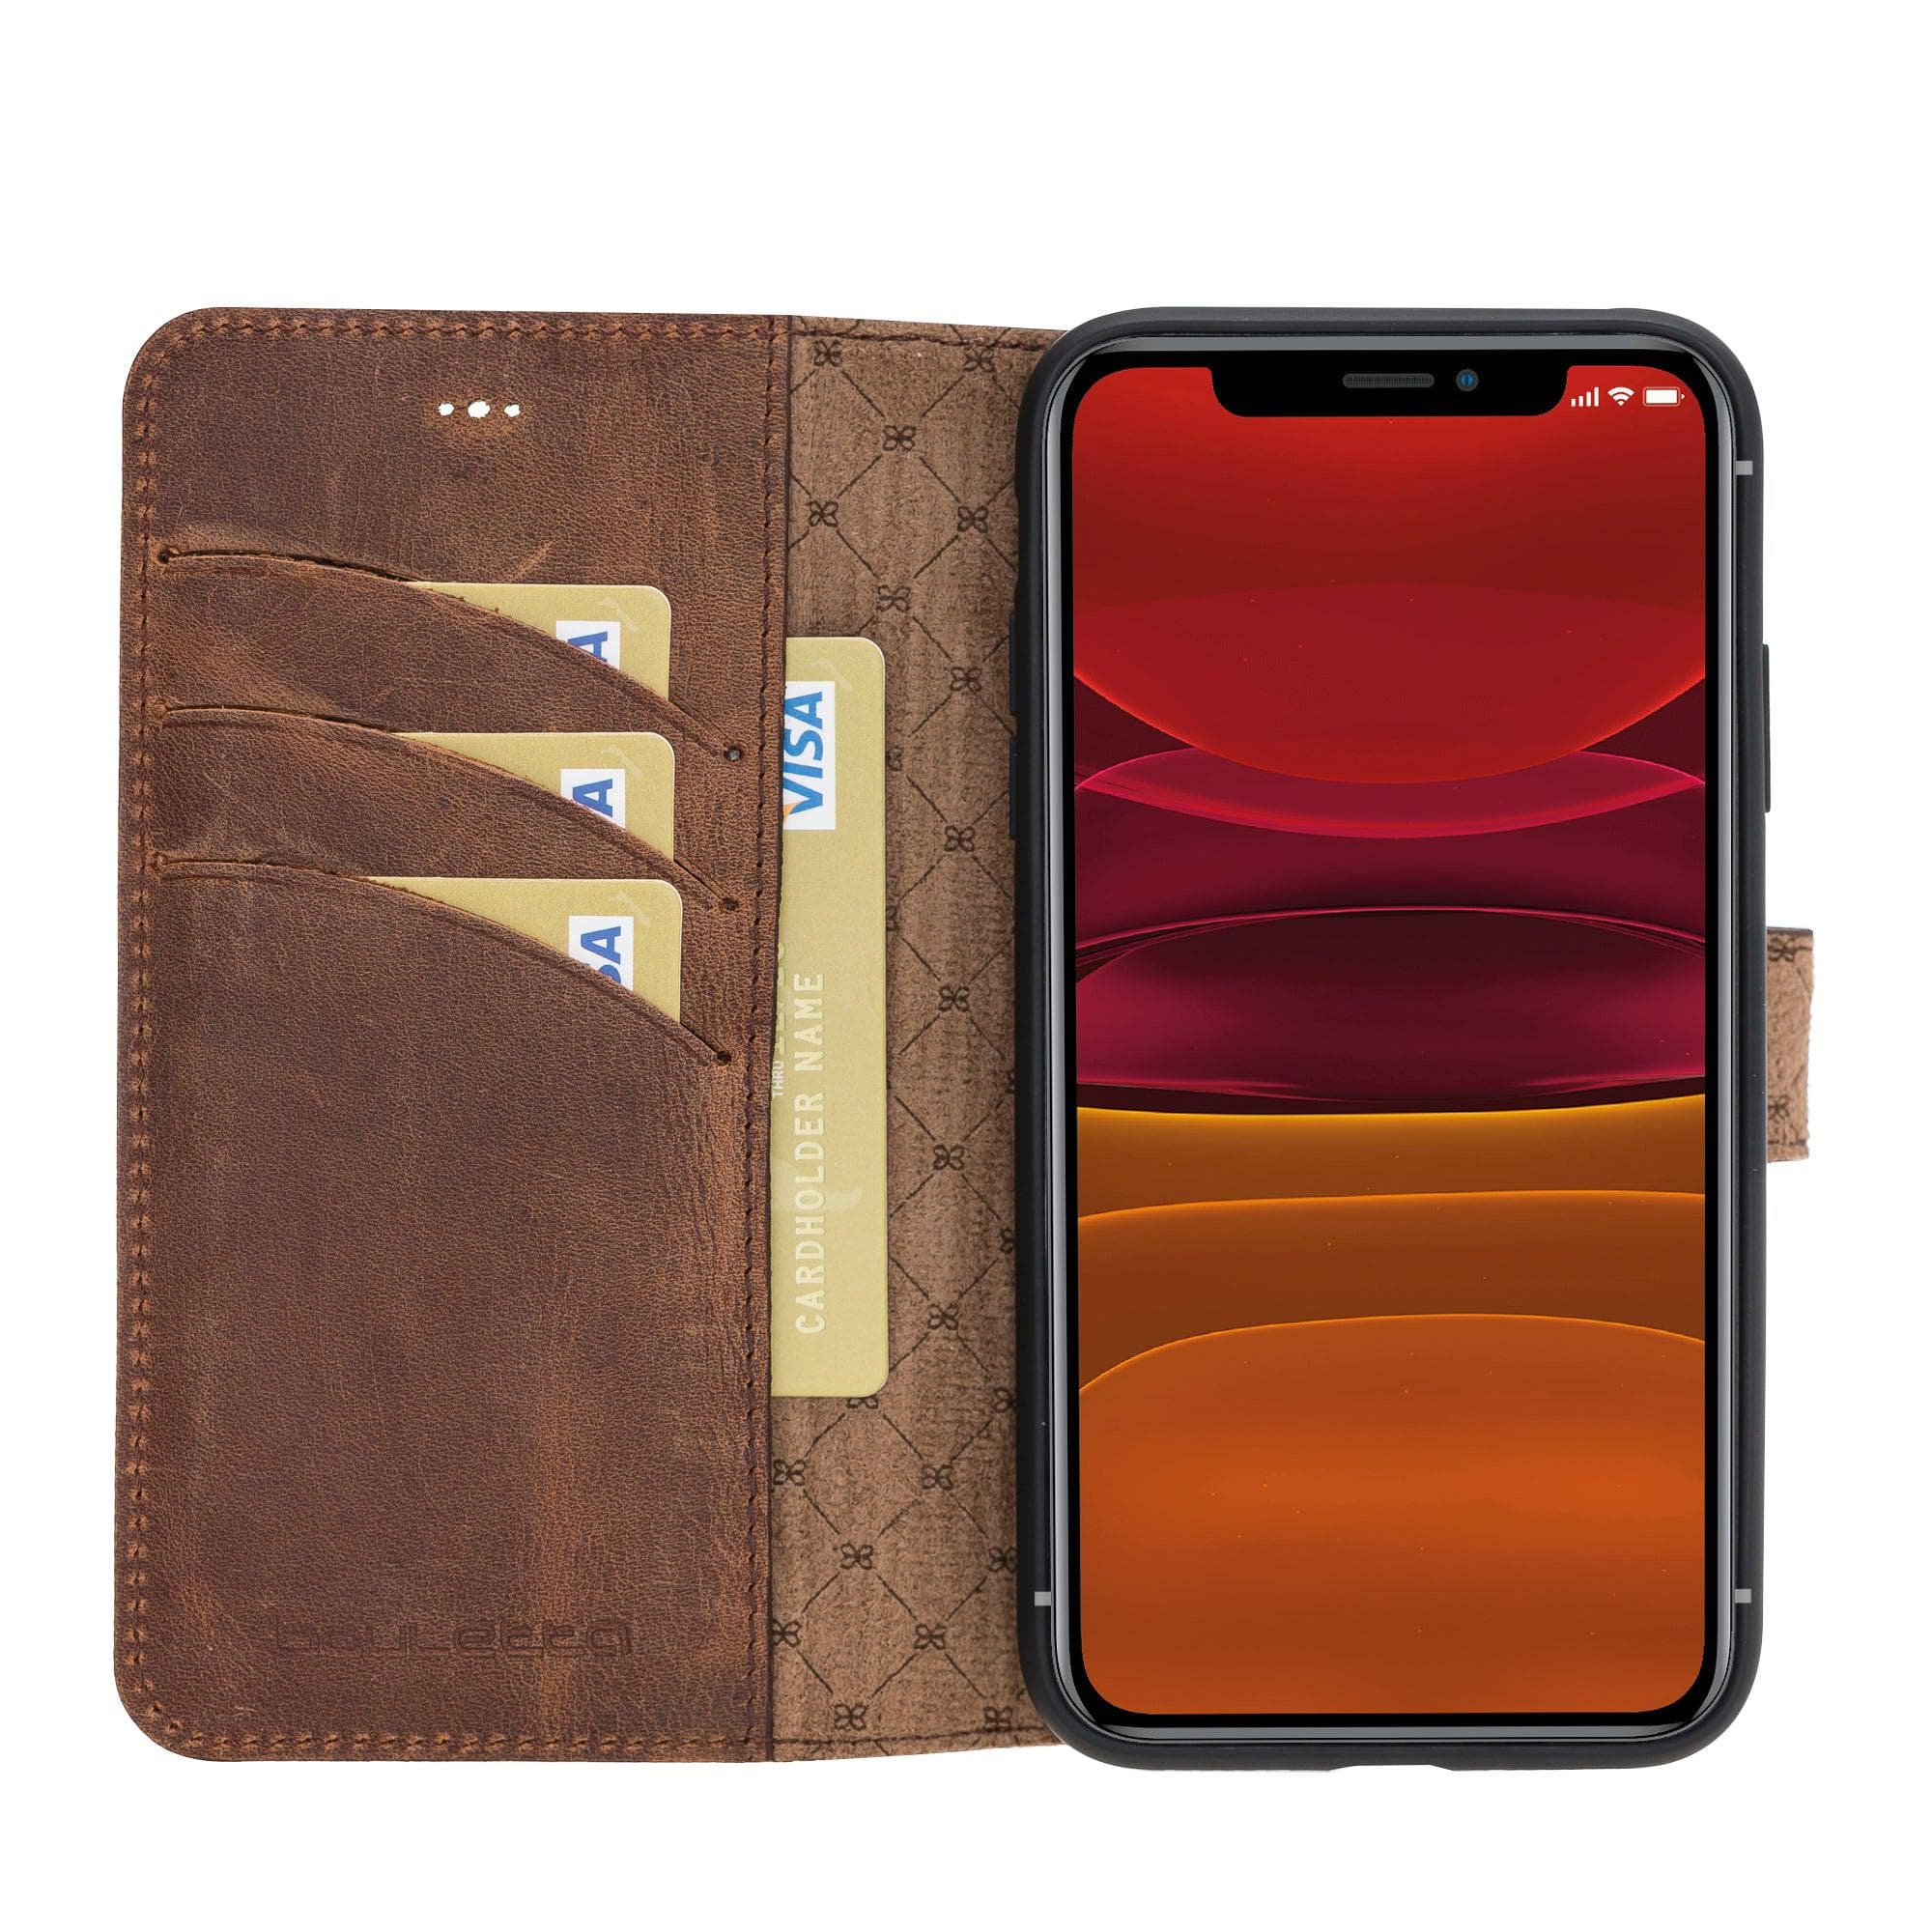 Wallet Folio with ID Slot Leather Wallet Case For Apple iPhone 11 Series İPhone 11 Promax / Antic Brown Bouletta LTD